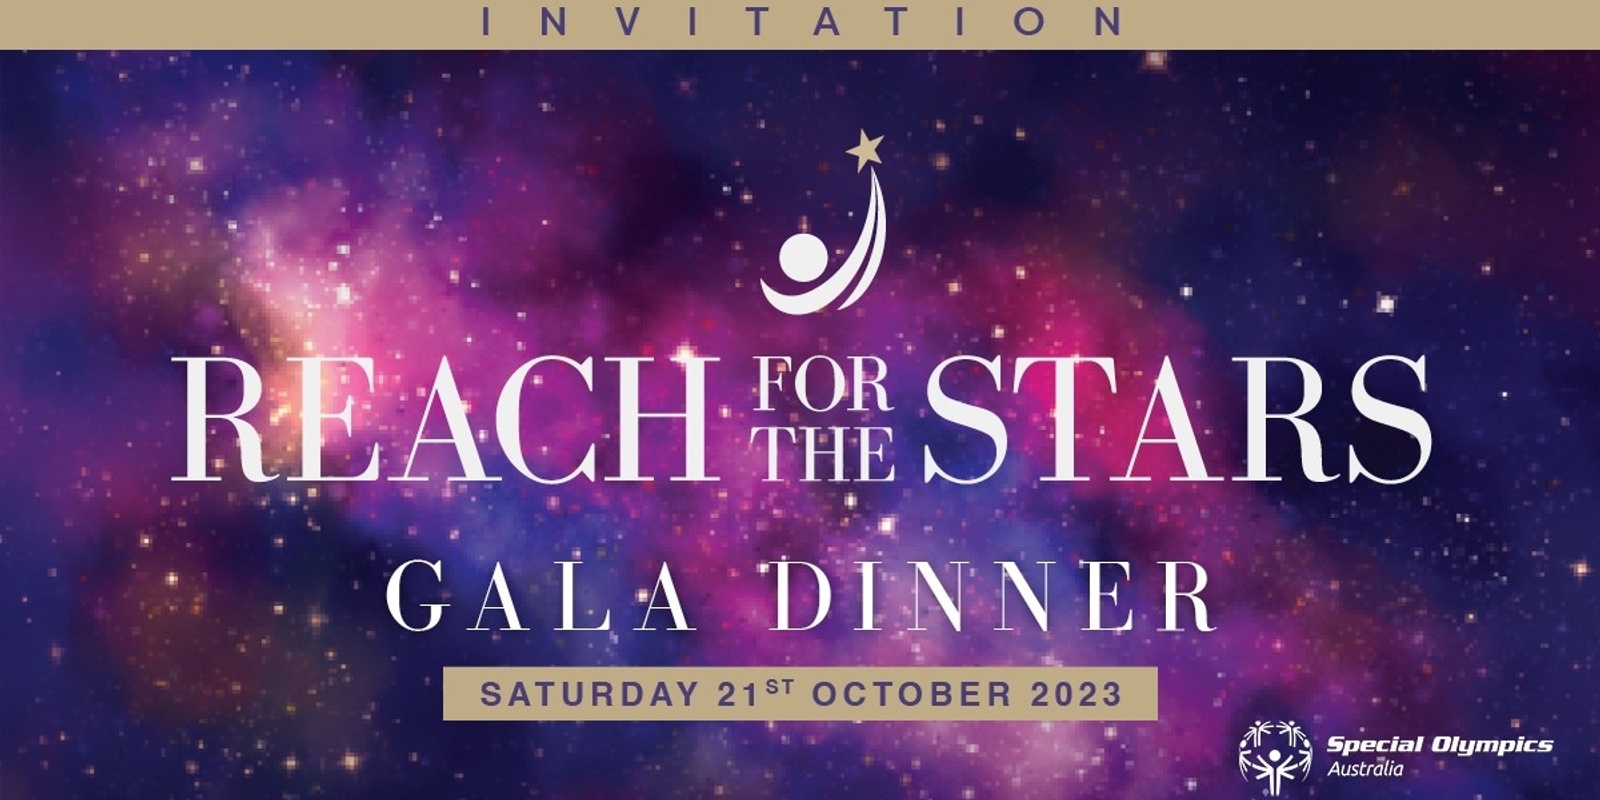 Banner image for Special Olympics Australia "Reach for the Stars" - Gala Dinner 2023